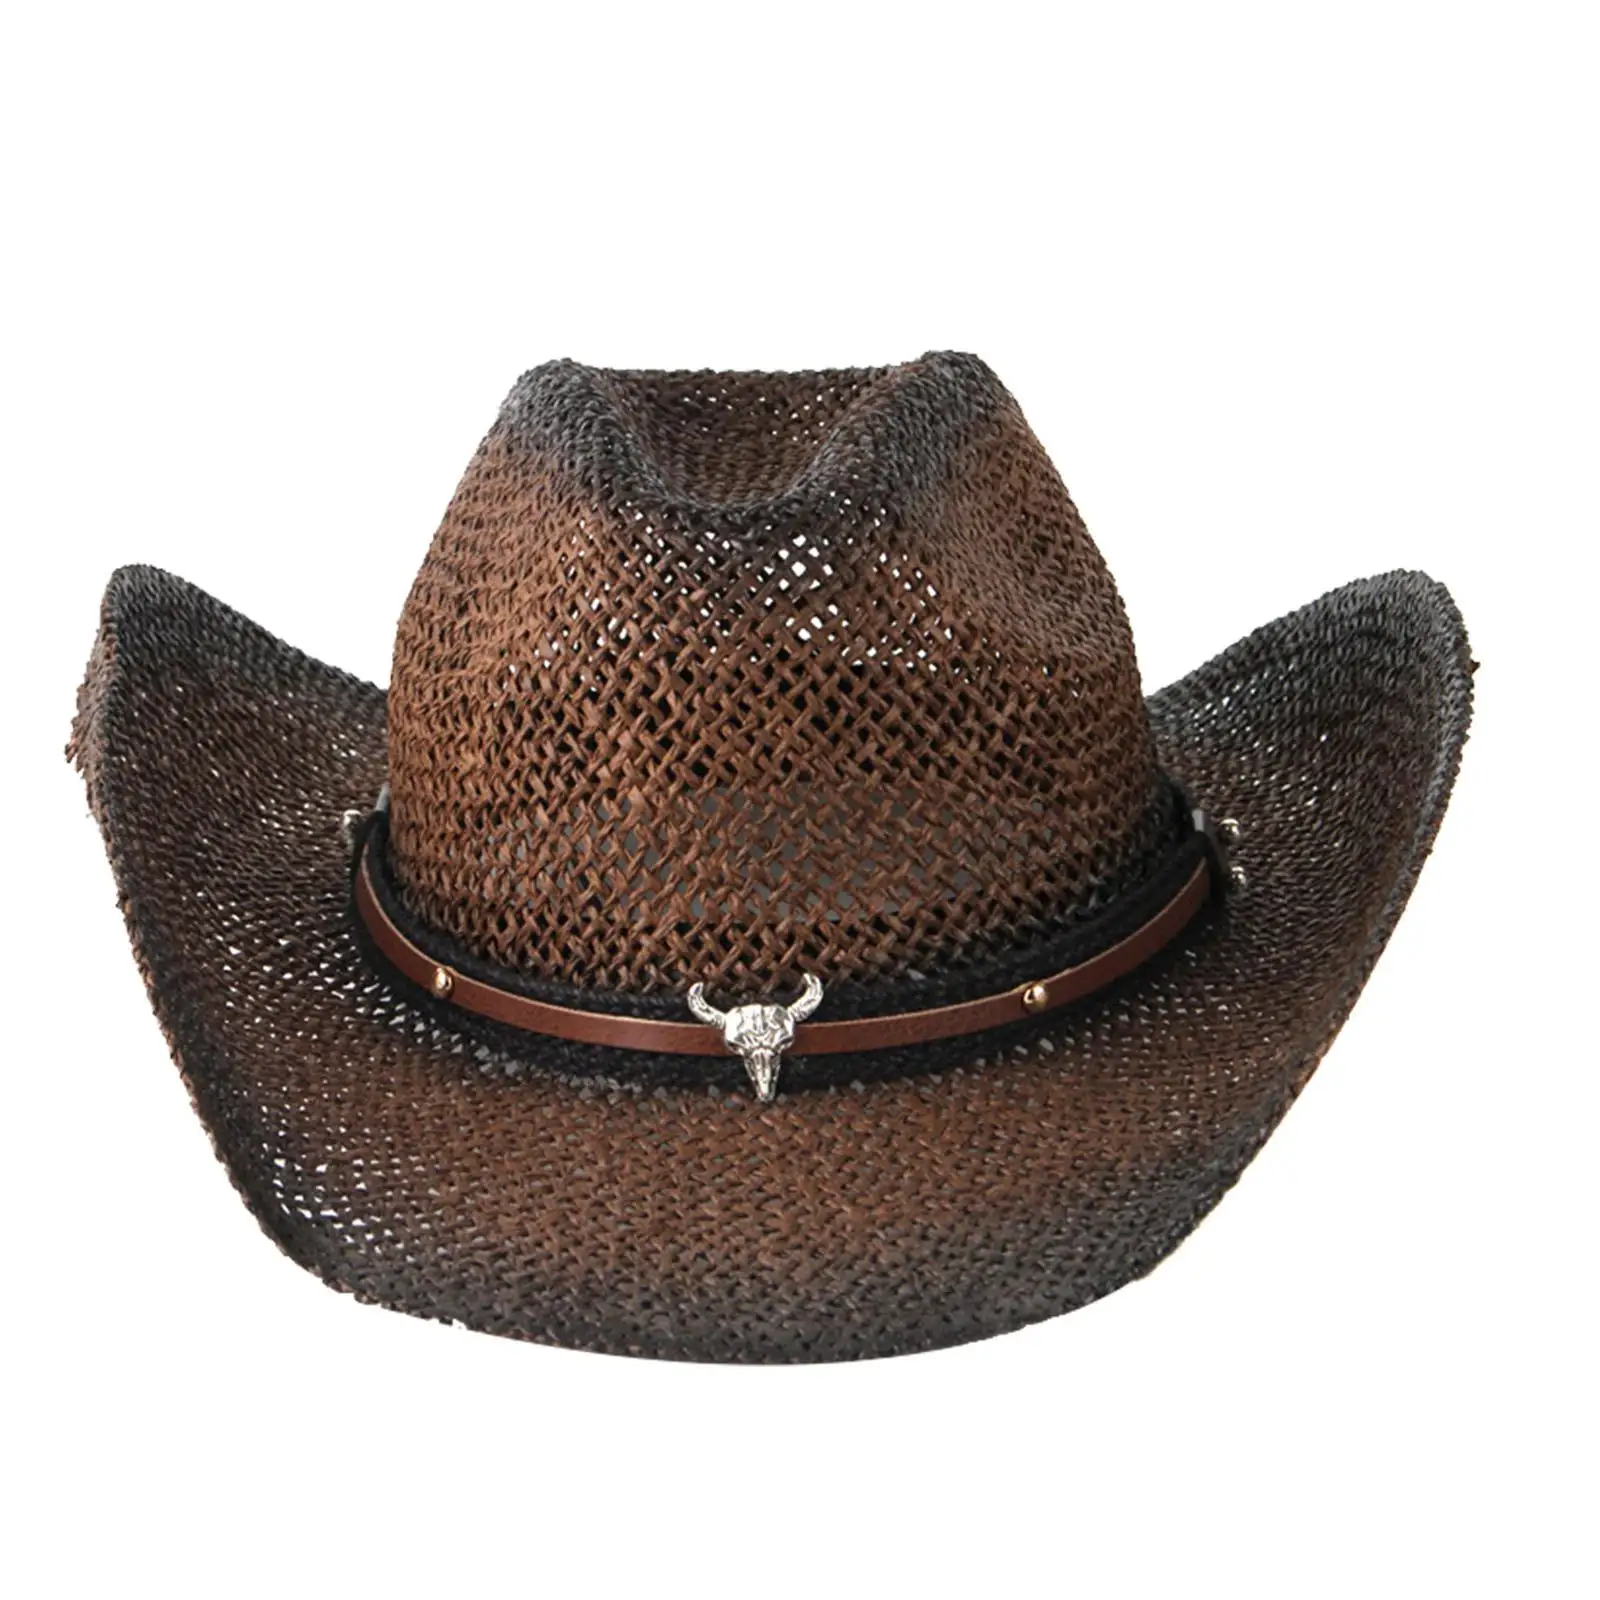 Vintage Straw Cowboy Hat, Sombreros Vagueros Shapeable Classic Hat Western Cowboy Hats for Rodeo Horseback Riding Outdoor Beach